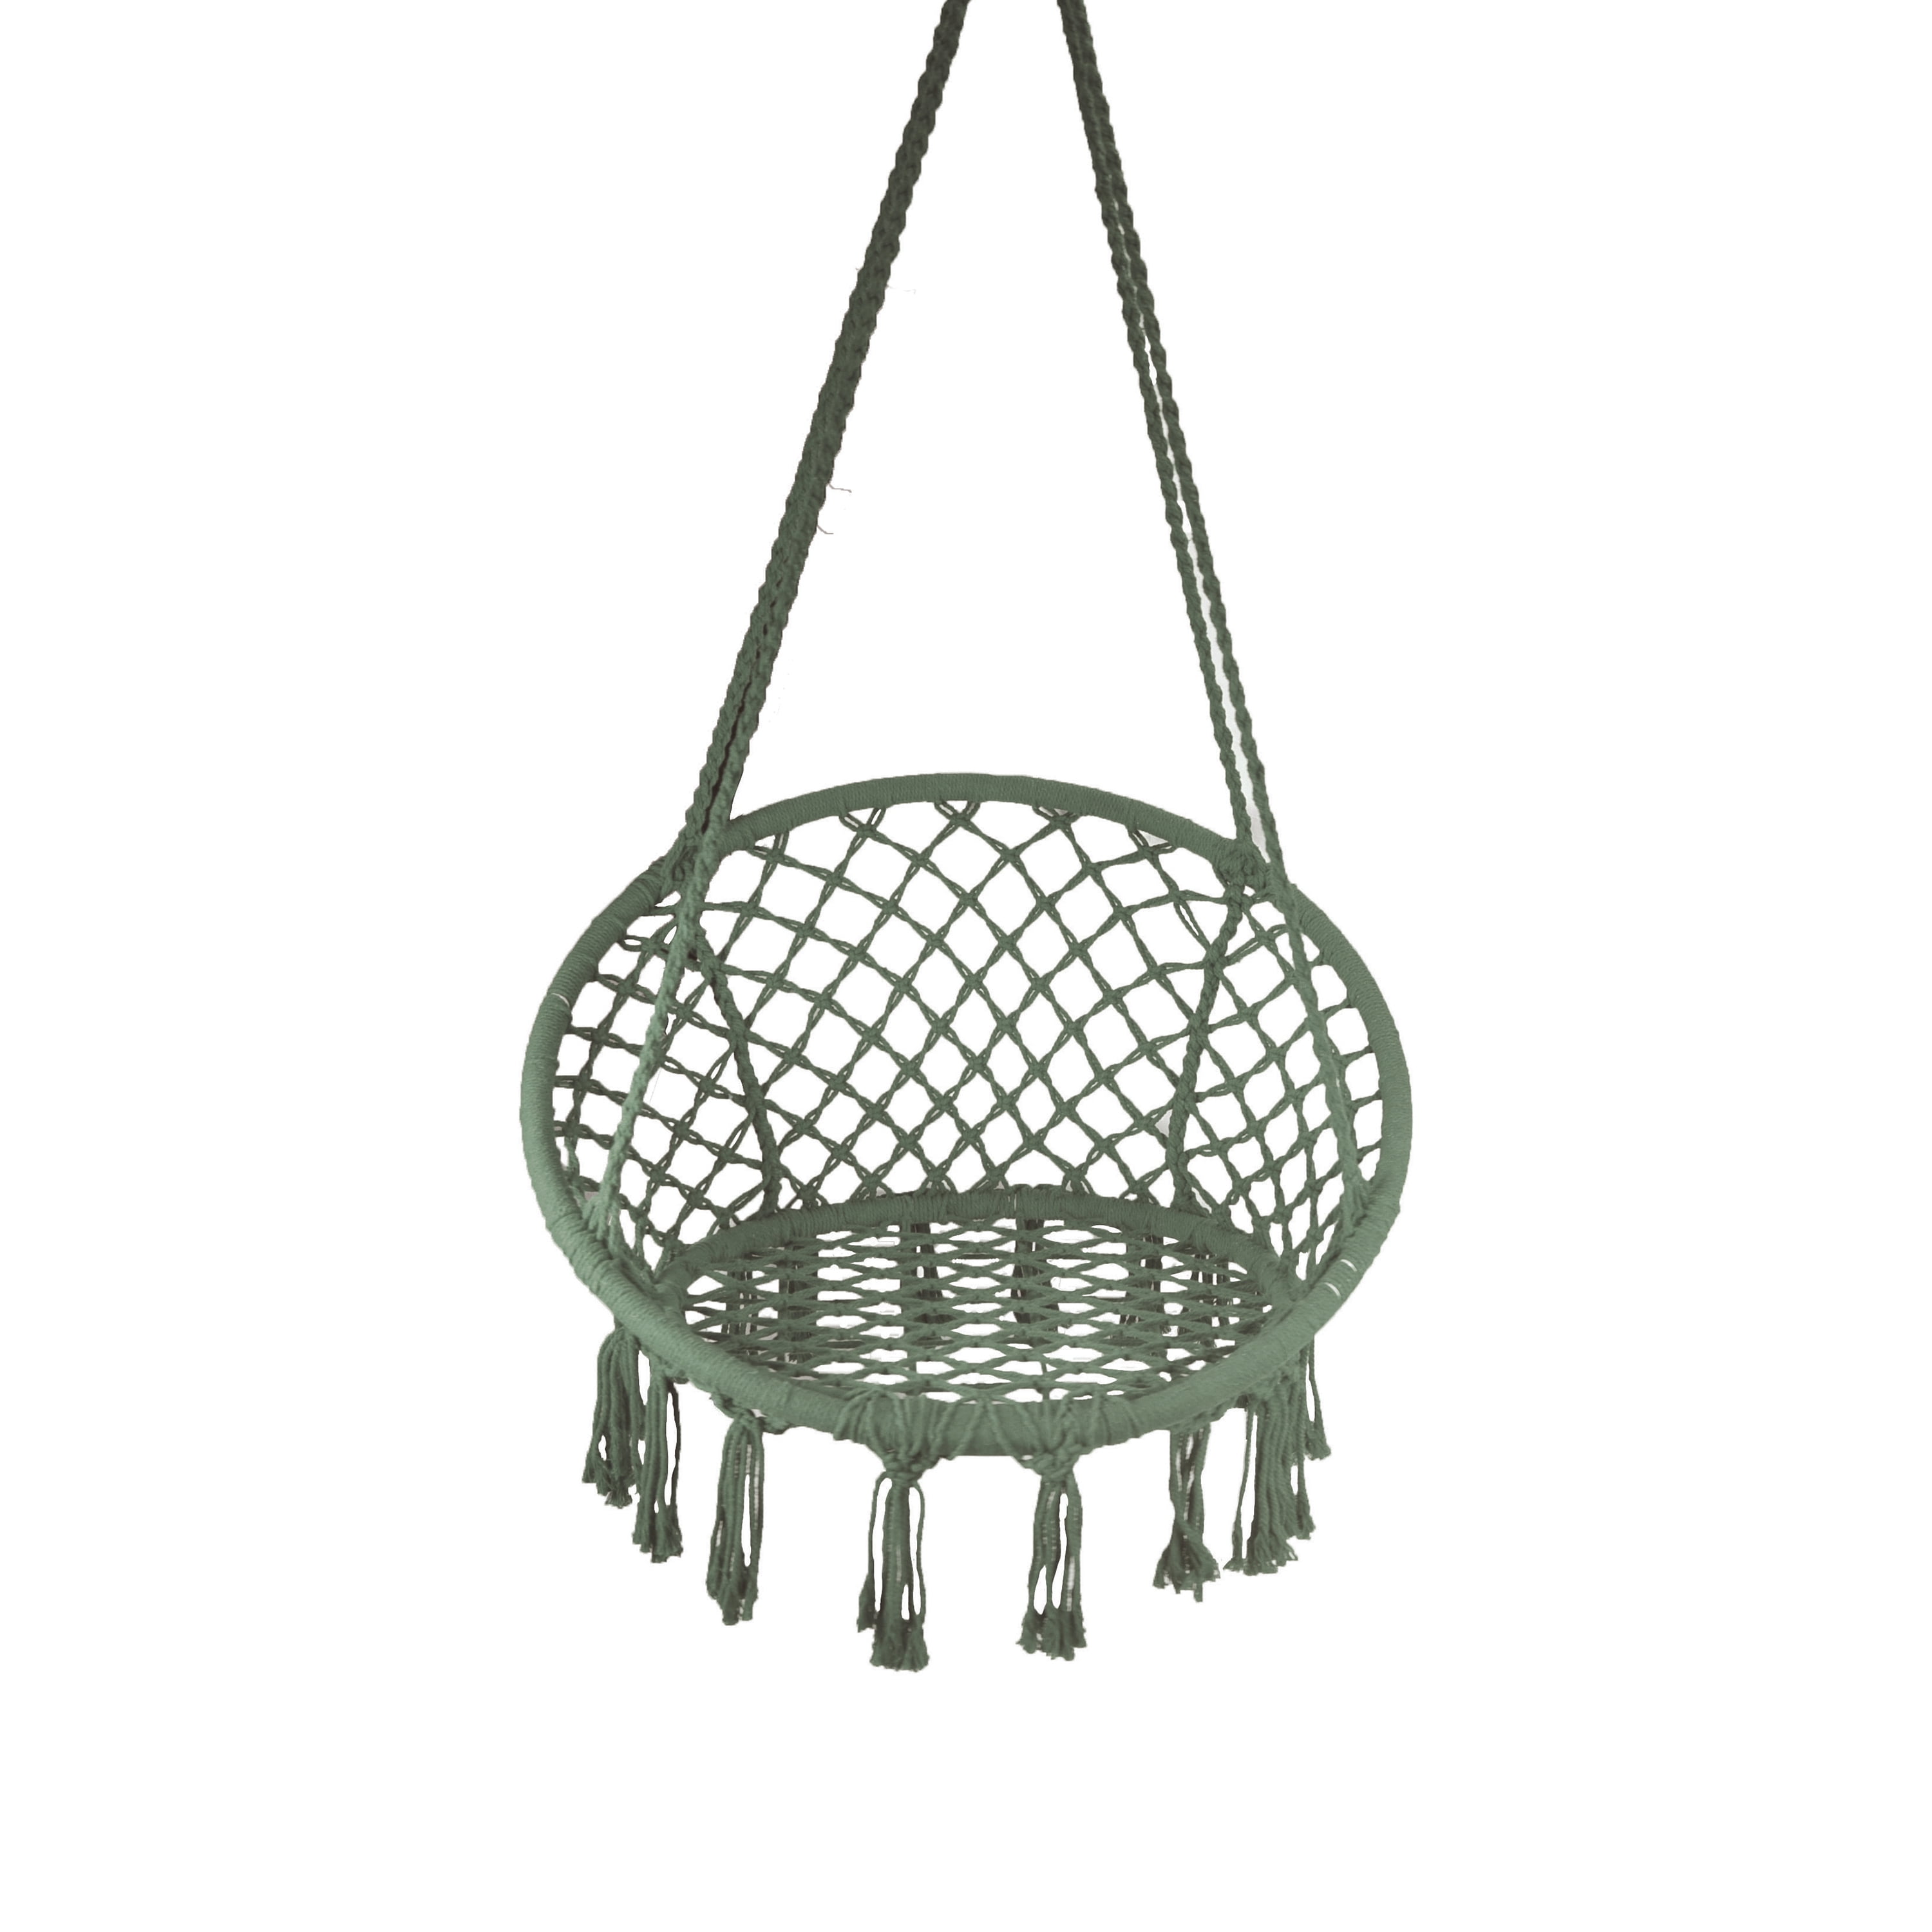 Equip Macrame Outdoor Hammock Chair, Cotton Blend Olive Green, Size: 47” L  x 24” W, Capacity 250 lb.